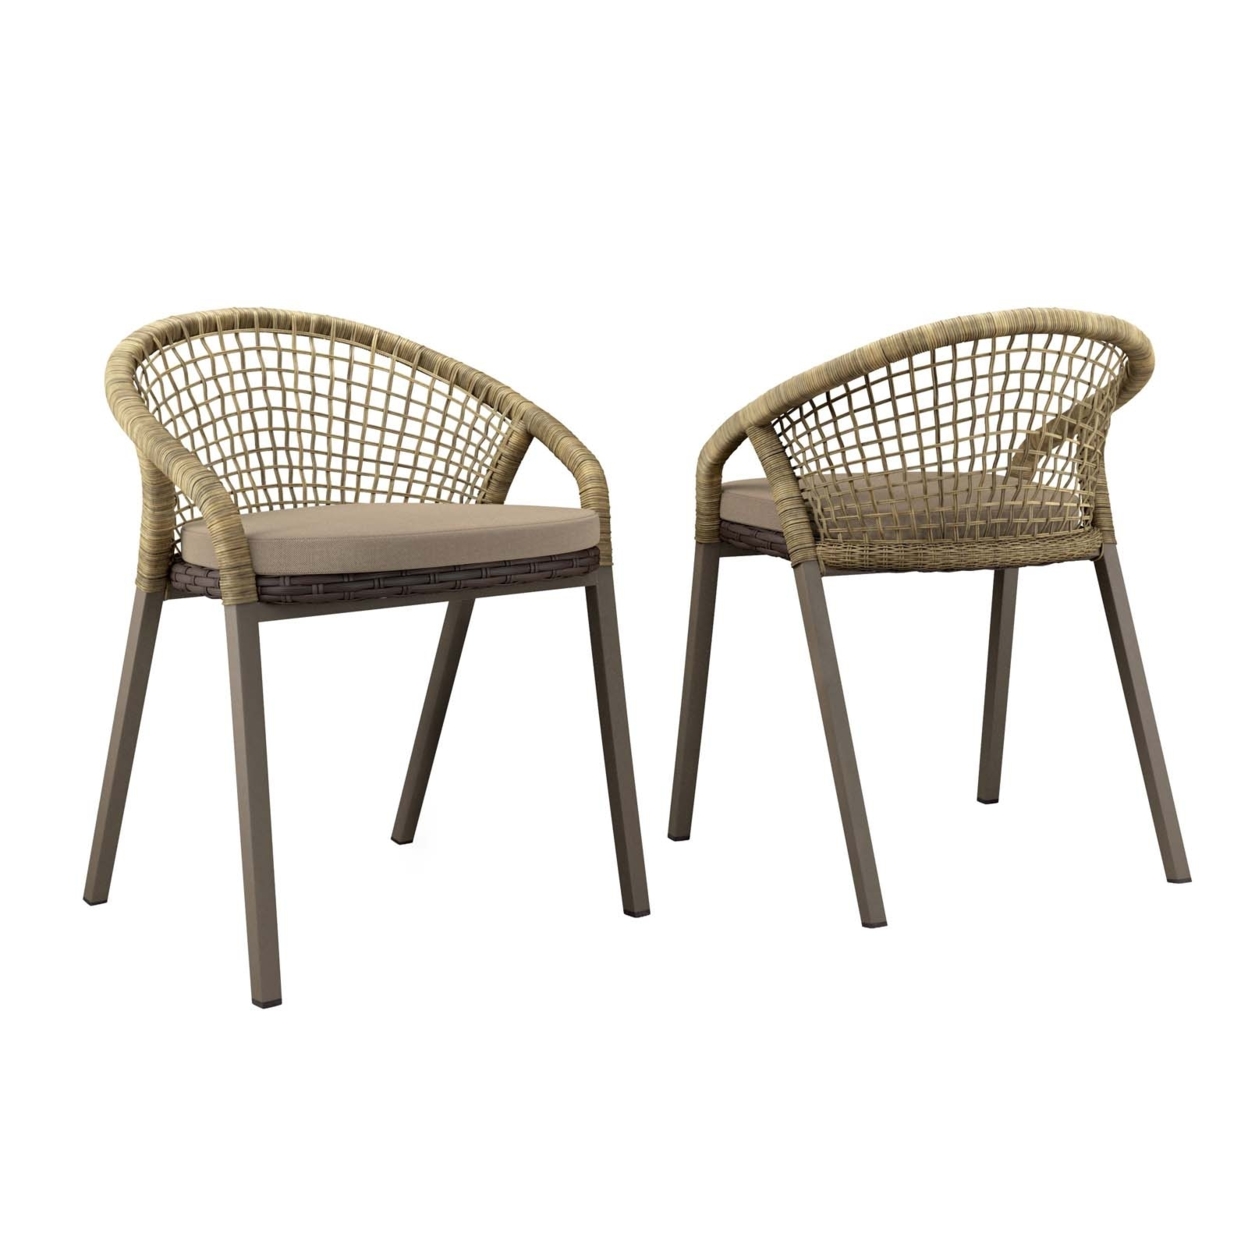 Meadow Outdoor Patio Dining Chairs Set Of 2, Natural Taupe